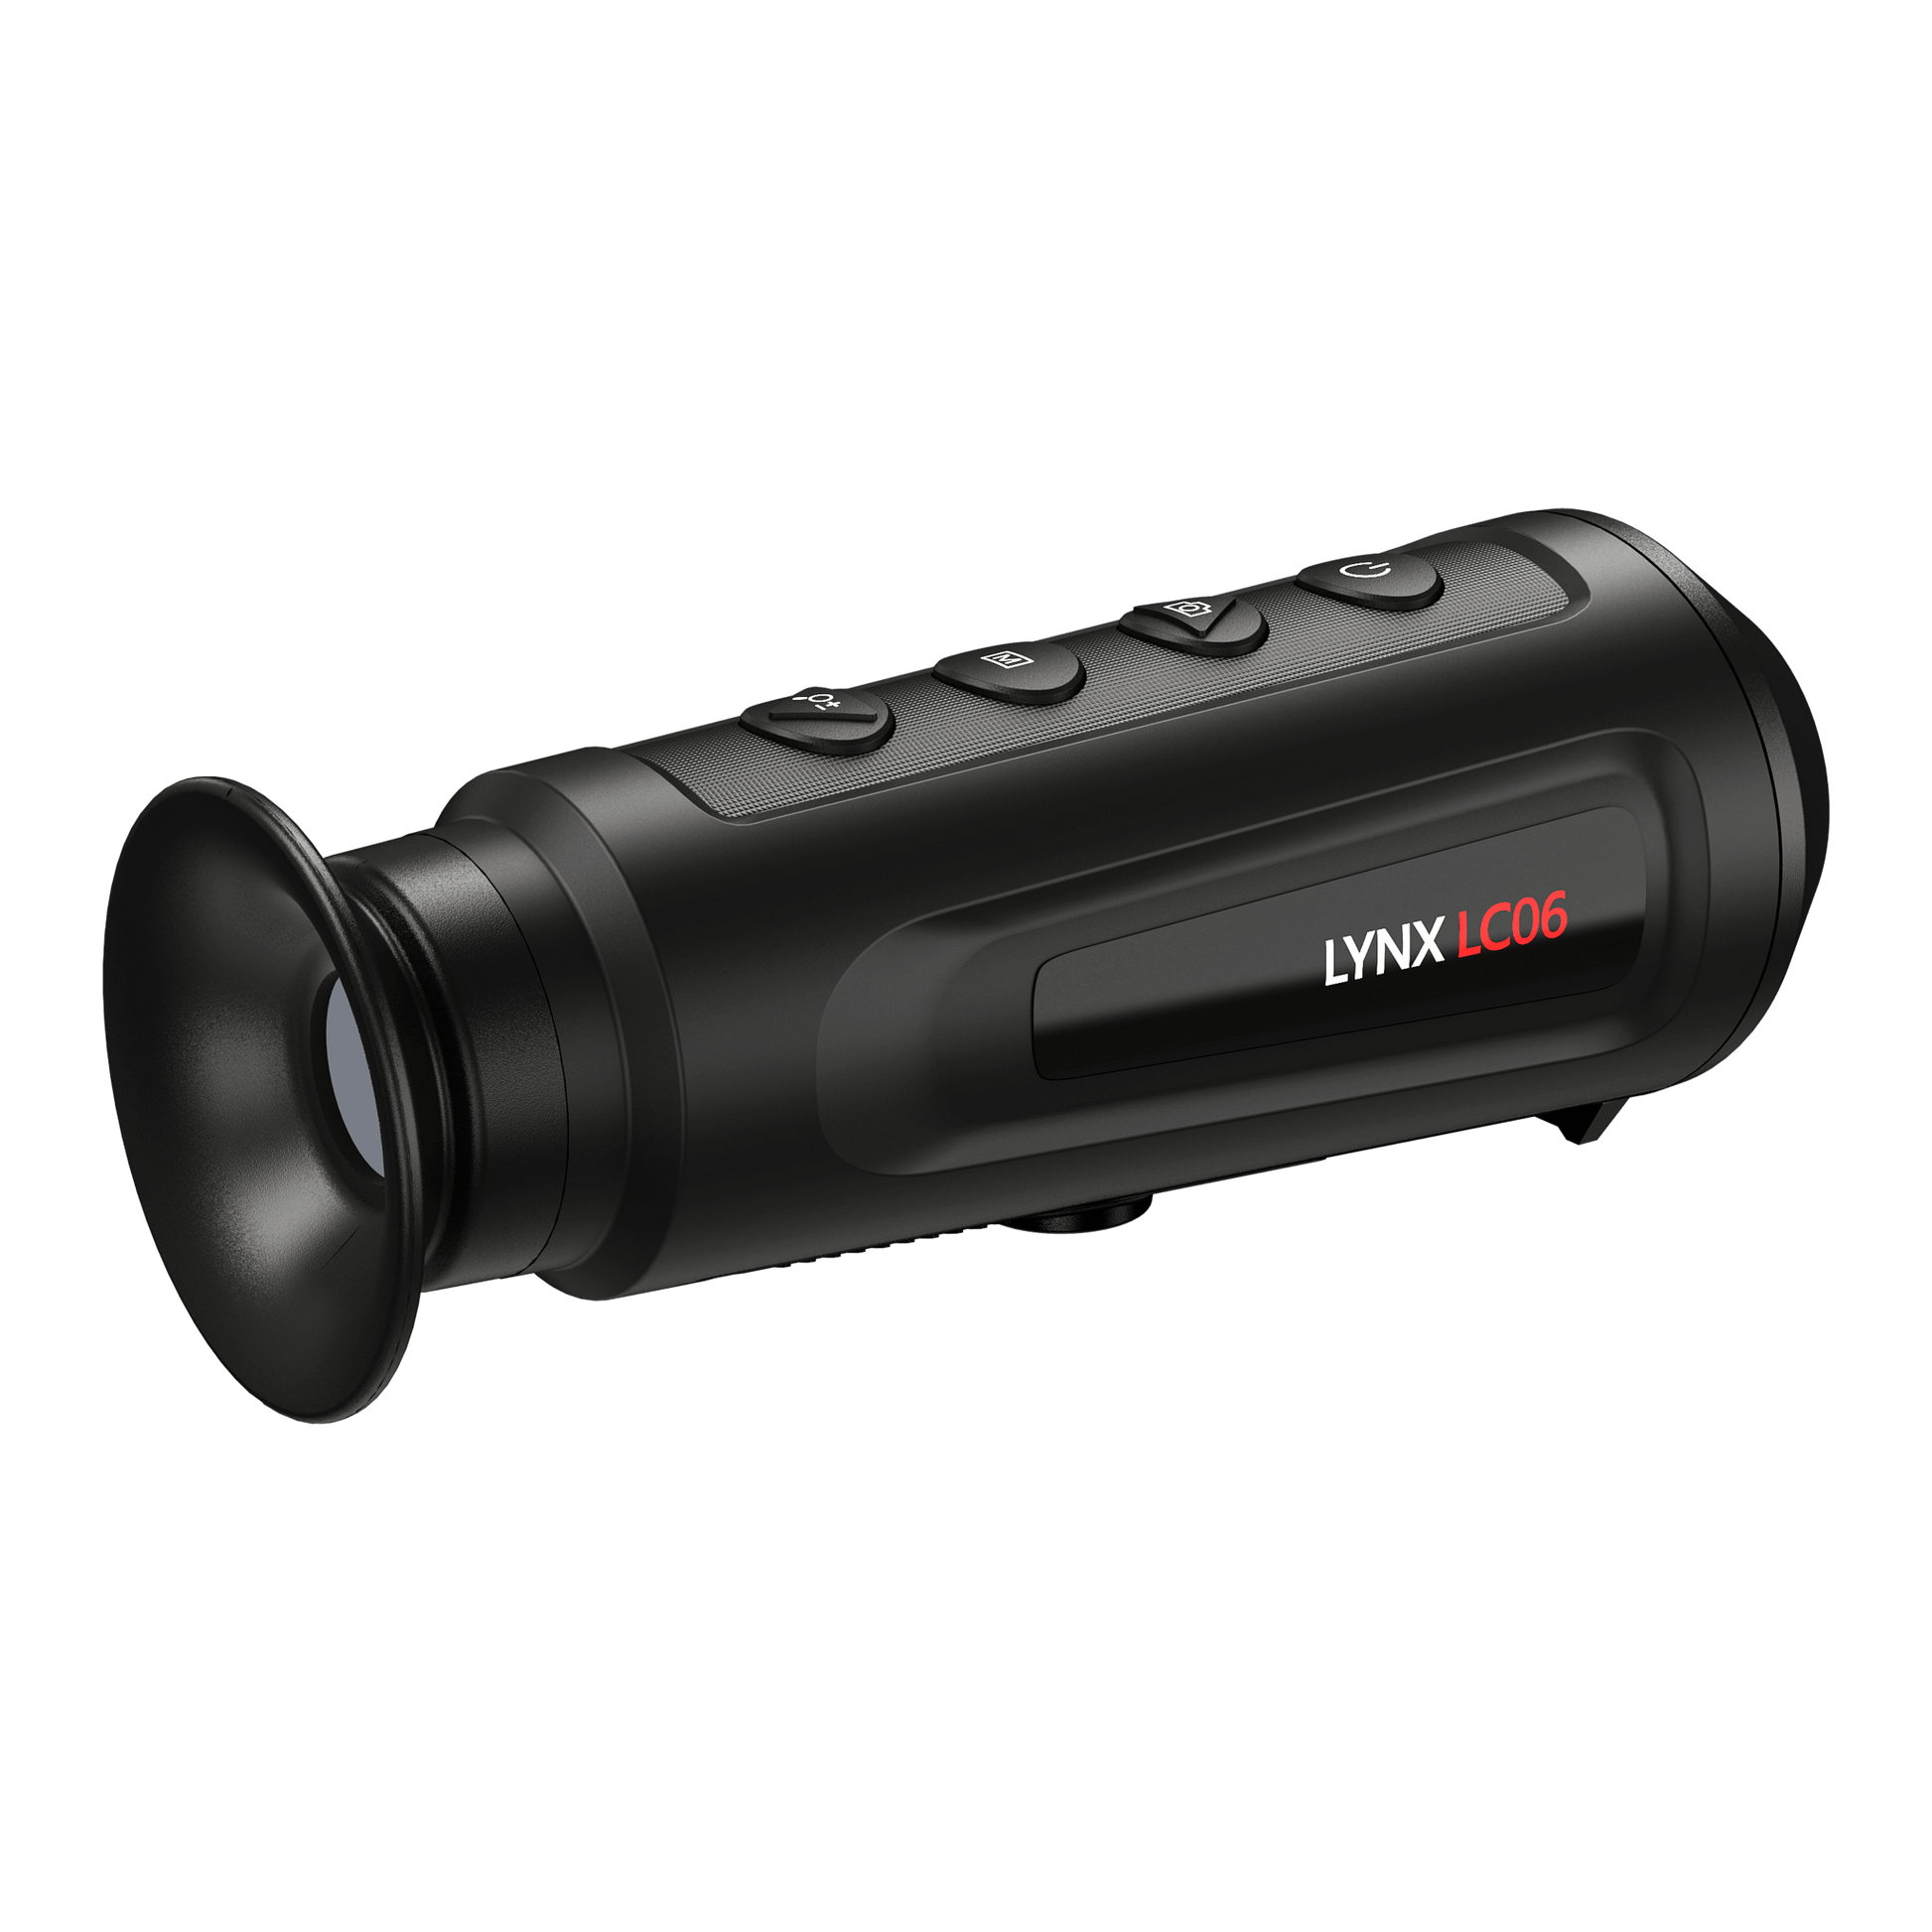 Cape Thermal - The best thermal imaging monoculars for sale - HikMicro LYNX LC06 Handheld thermal imaging monocular - Side View